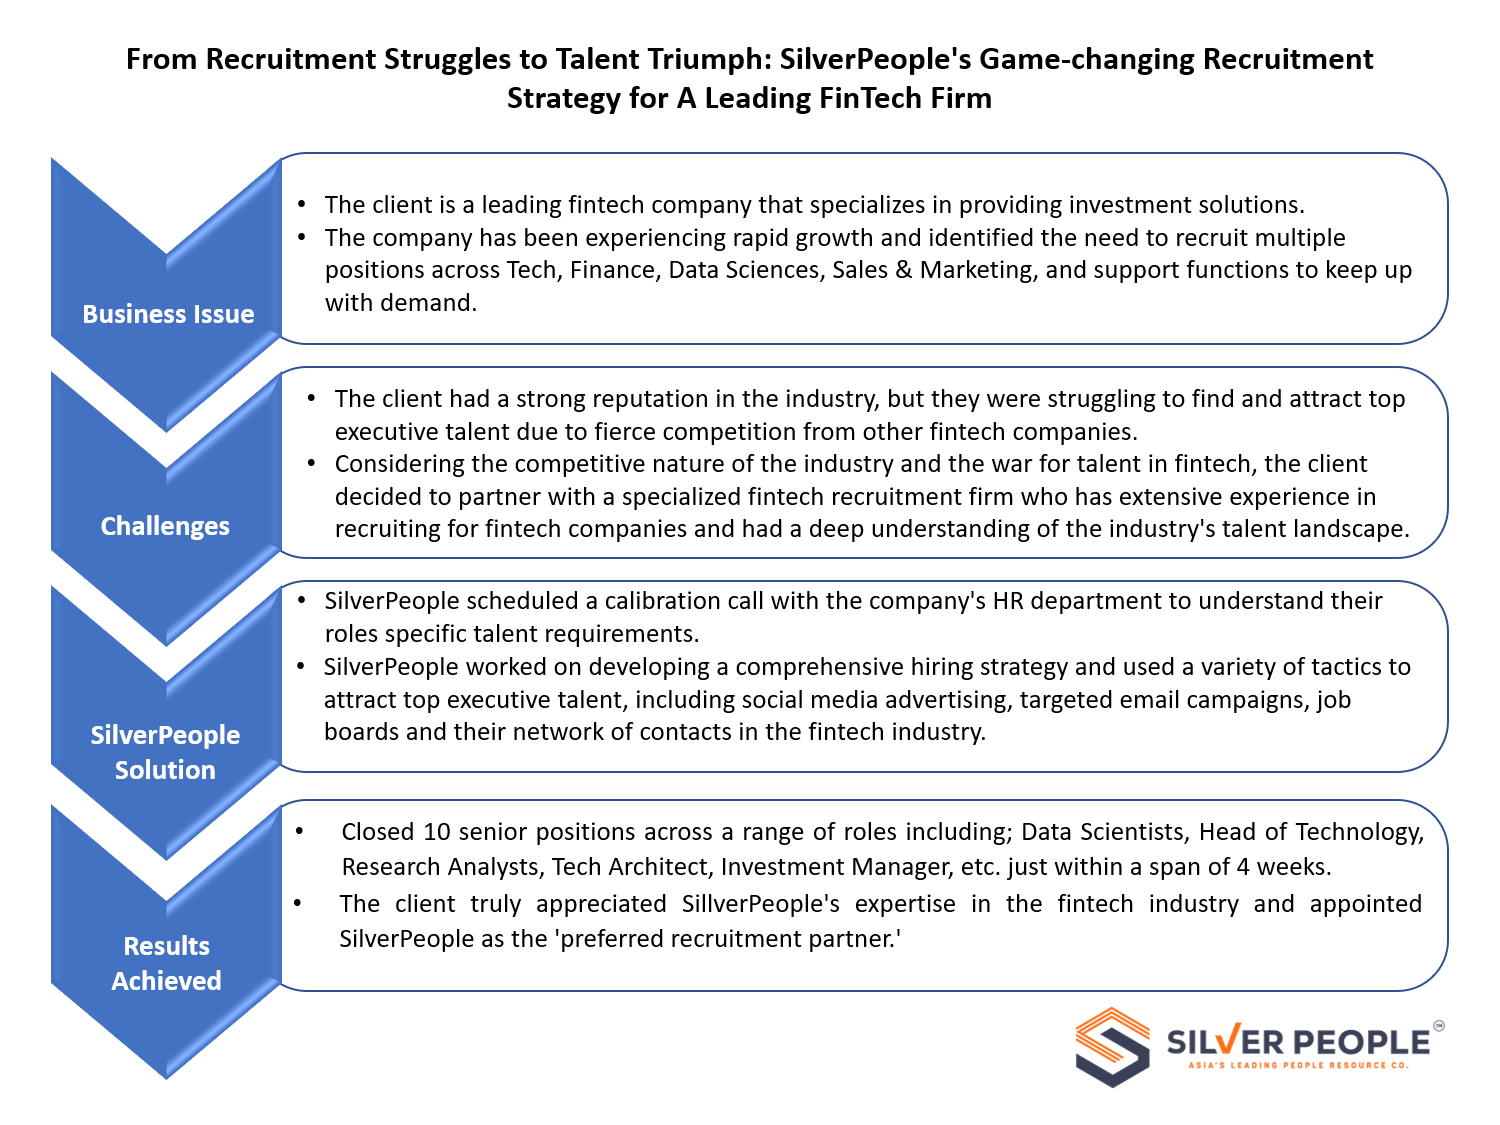 From Recruitment Struggles to Talent Triumph - Game Changing Recruitment Strategy for A Leading FinTech Firm